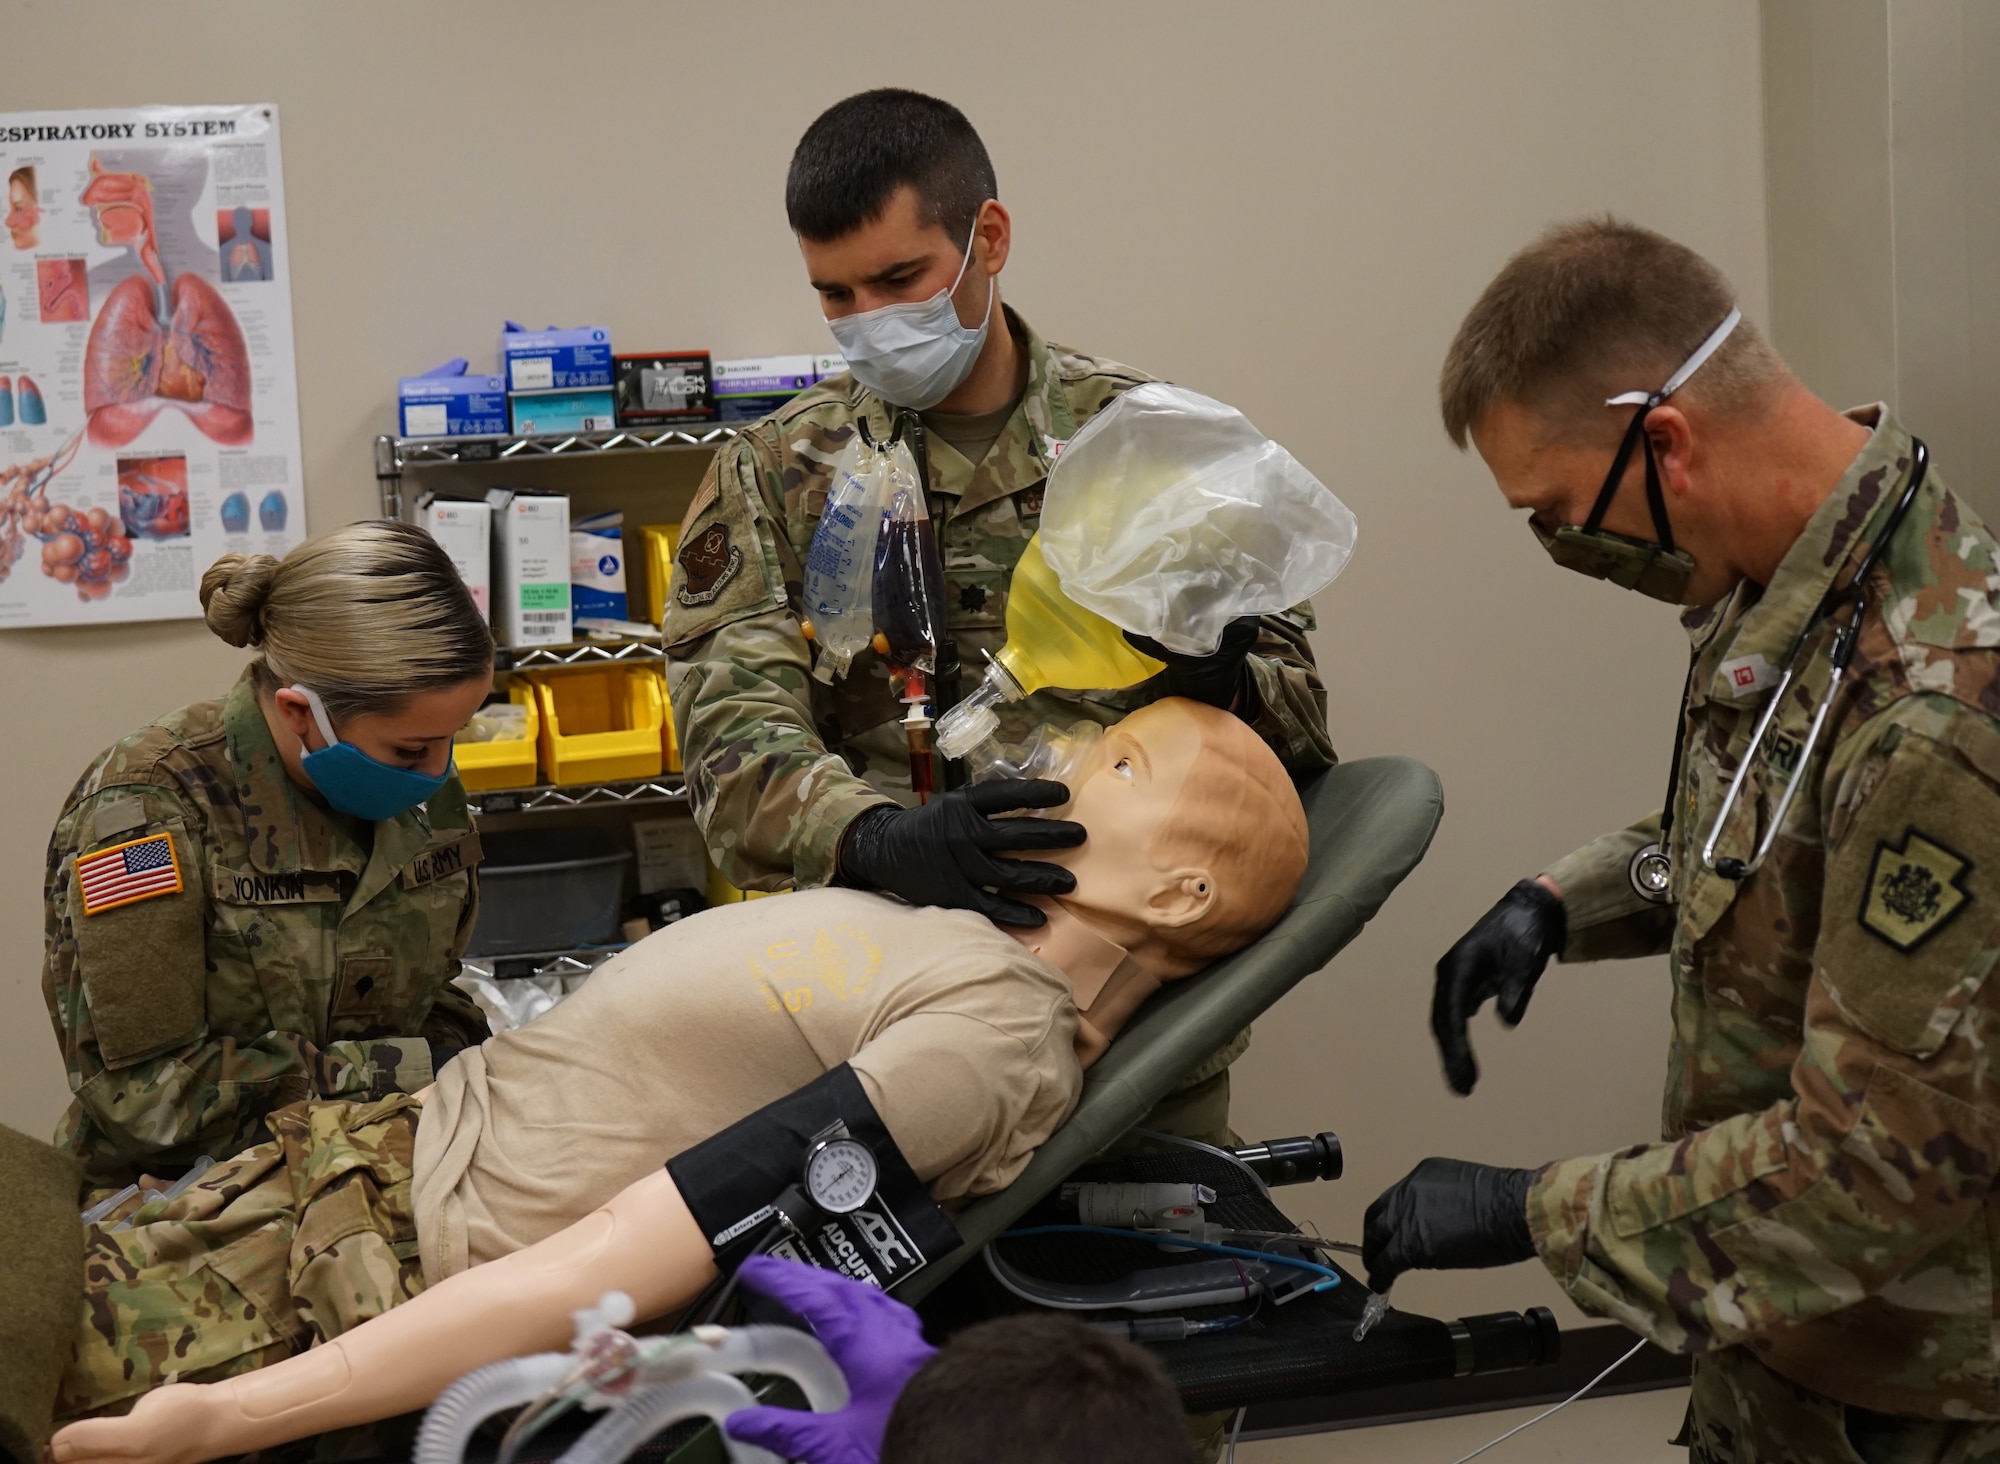 Left to right: Army Spc. Caitlyn Yonkin, combat medic with the medical detachment, Pennsylvania Joint Force Headquarters; Air National Guard Lt. Col. Jared Northrop, pharmacist with the 193rd Special Operations Medical Group Detachment 1; and Army Maj. Brian Walters, physician assistant with the Med. Det., respond to a training scenario at the Medical Simulation Training Center at Fort Indiantown Gap, May 6, 2020.